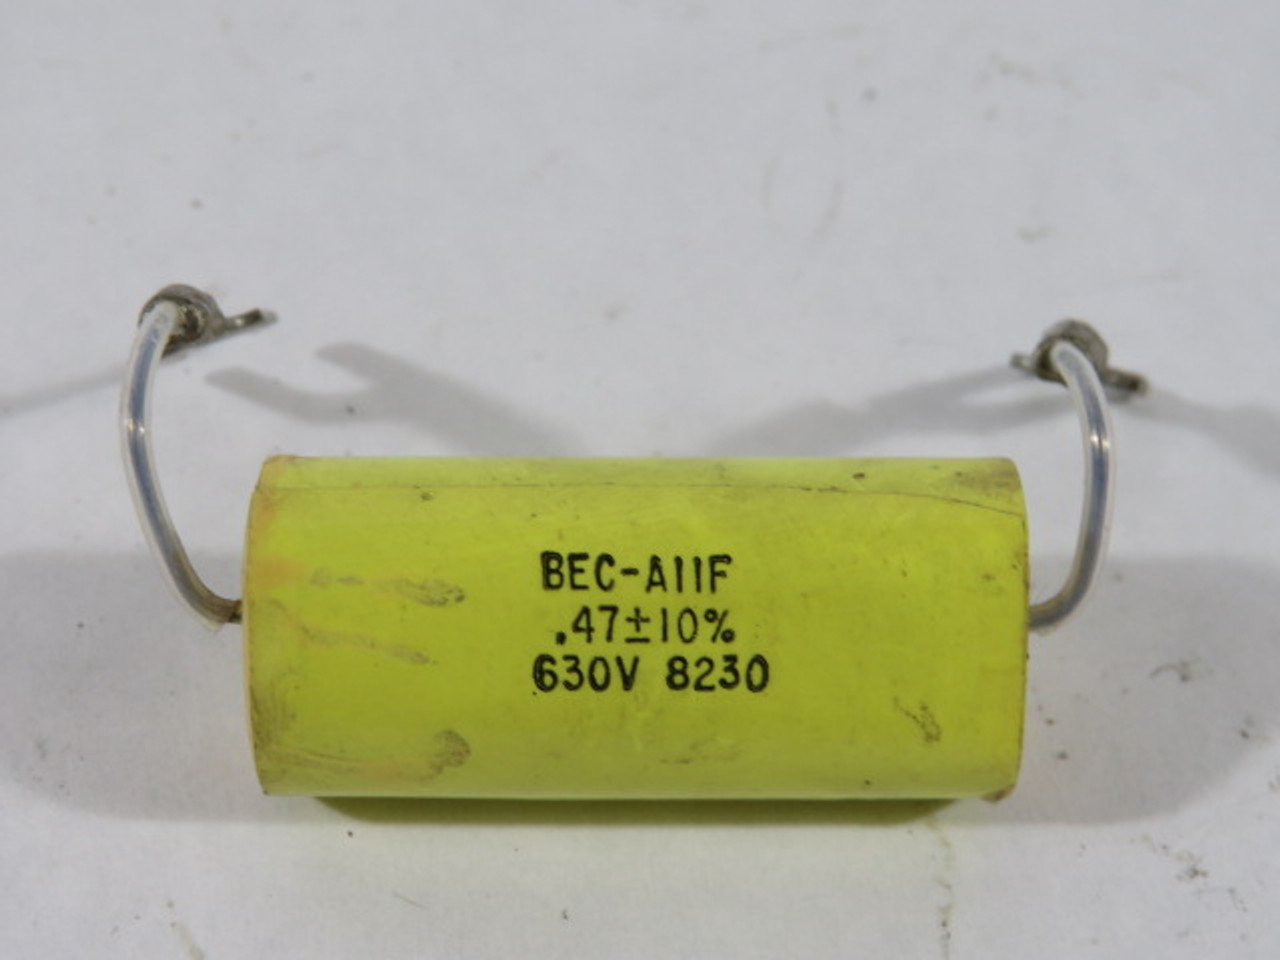 Generic BEC A11F .47+10% 630V Capacitor USED